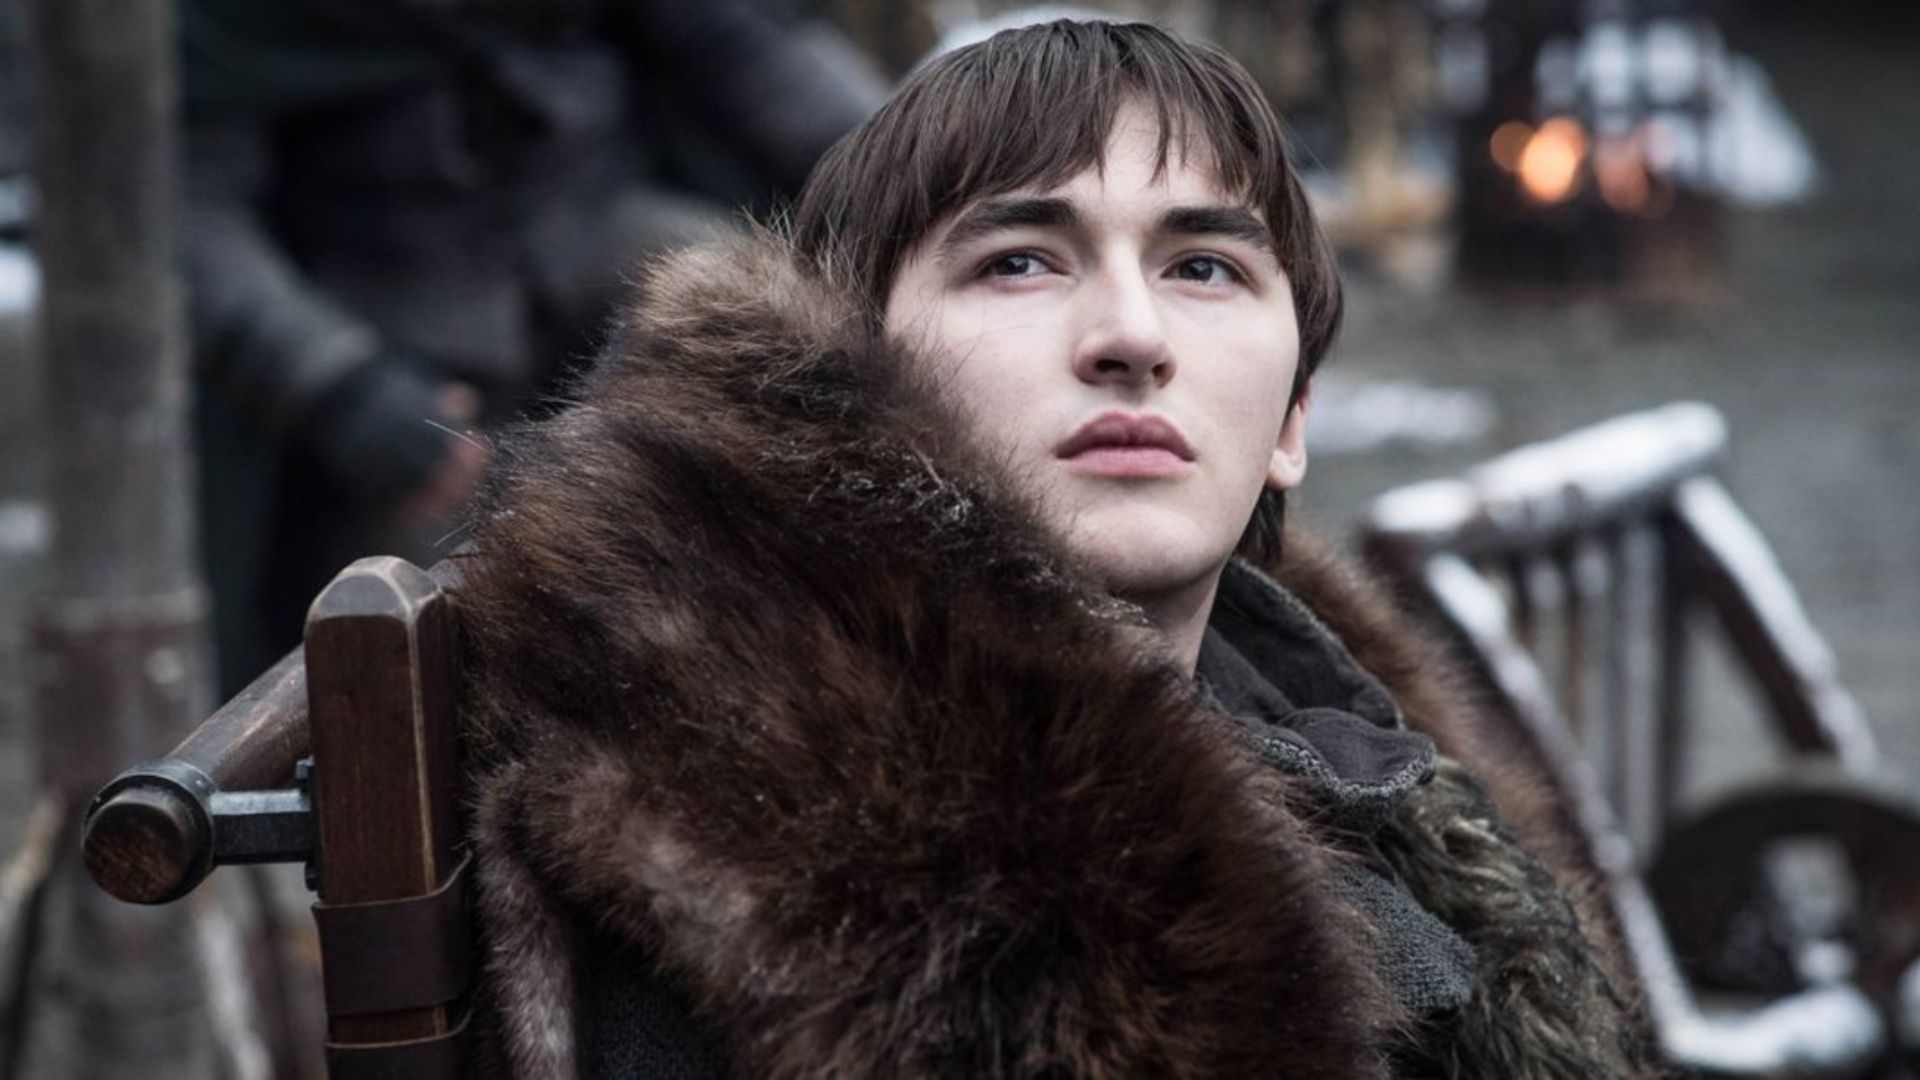 Reddit Is Bursting With 'Game of Thrones' Theories About Bran